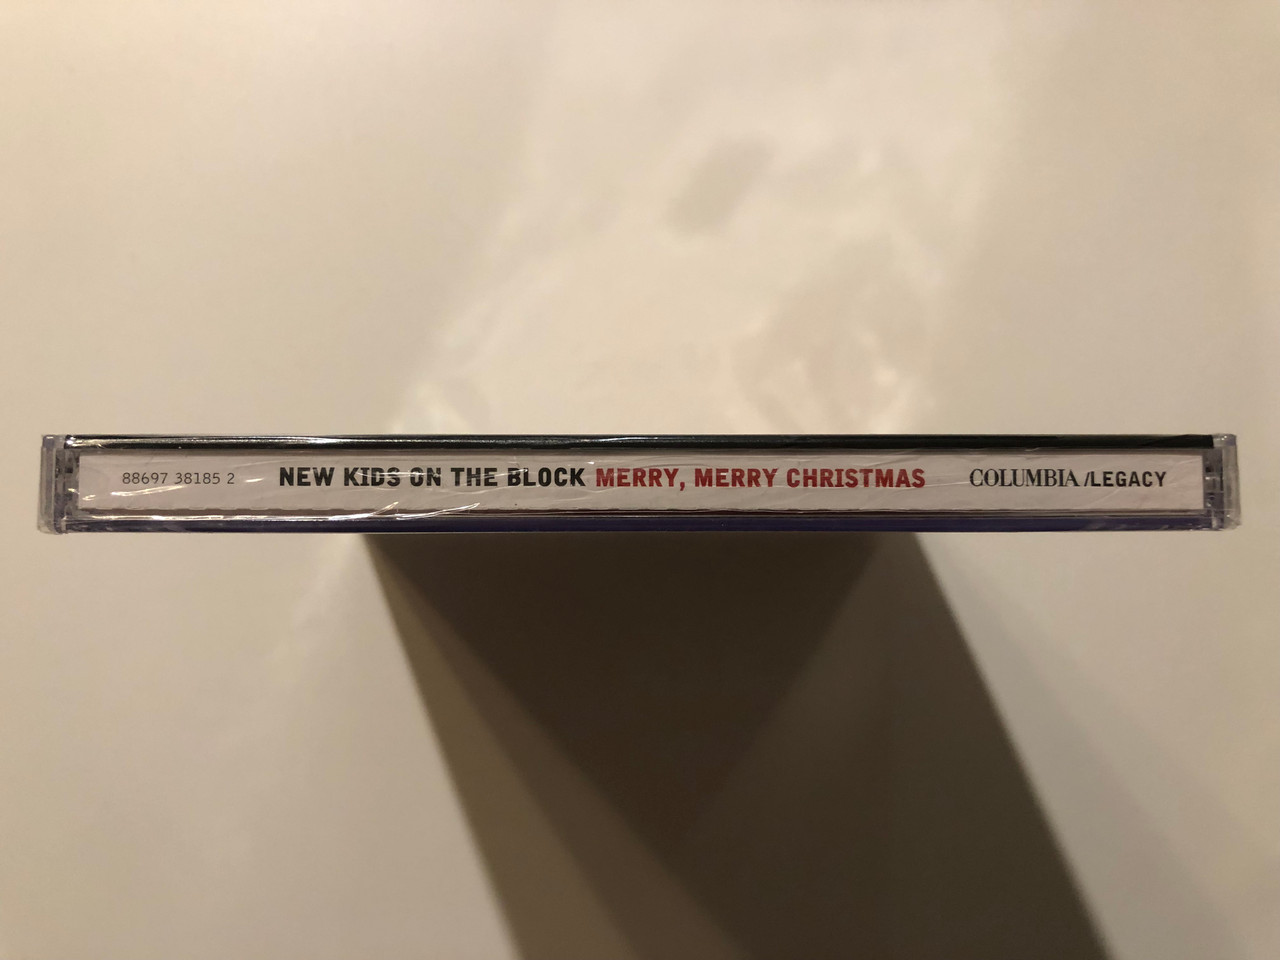 https://cdn10.bigcommerce.com/s-62bdpkt7pb/products/0/images/204022/New_Kids_On_The_Block_Merry_Merry_Christmas_The_First_And_Only_New_Kids_Holiday_Album_Includes_The_Hit_This_Ones_For_The_Children_other_holiday_favorites_Columbia_Audio_CD_200_3__71165.1641194920.1280.1280.JPG?c=2&_gl=1*13kysy3*_ga*MjA2NTIxMjE2MC4xNTkwNTEyNTMy*_ga_WS2VZYPC6G*MTY0MTE5NDMxMi4yNDQuMS4xNjQxMTk0NjczLjM4